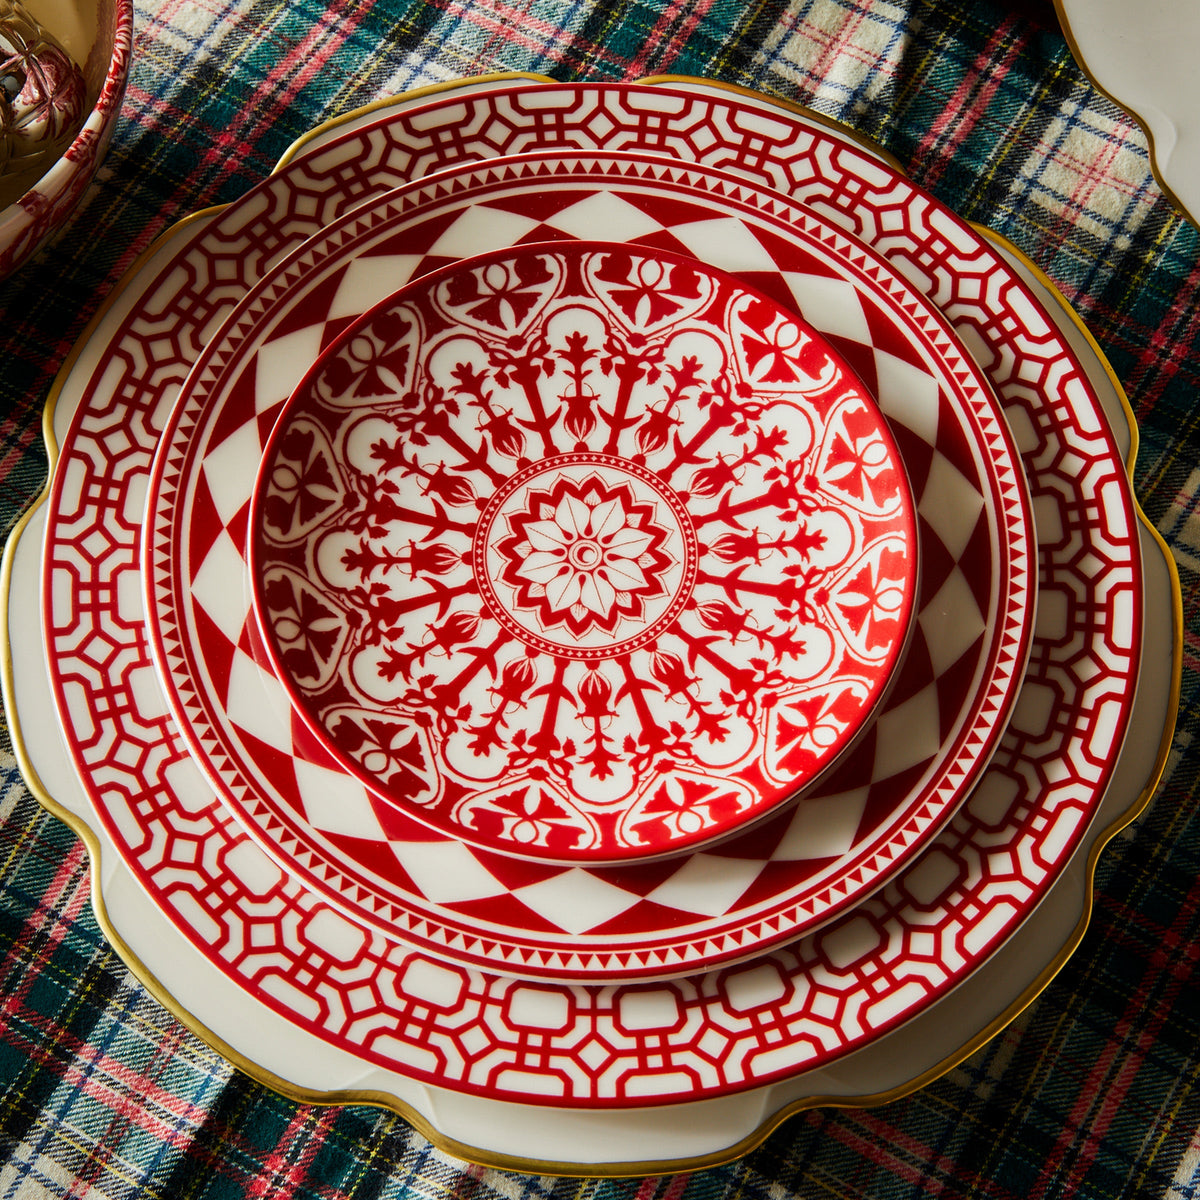 A stack of three high-fired porcelain plates with intricate red and white patterns on a plaid tablecloth. The plates vary in size, with the smallest, resembling a Fez Crimson Rimmed Salad Plate by Caskata Artisanal Home, on top and the largest at the bottom.